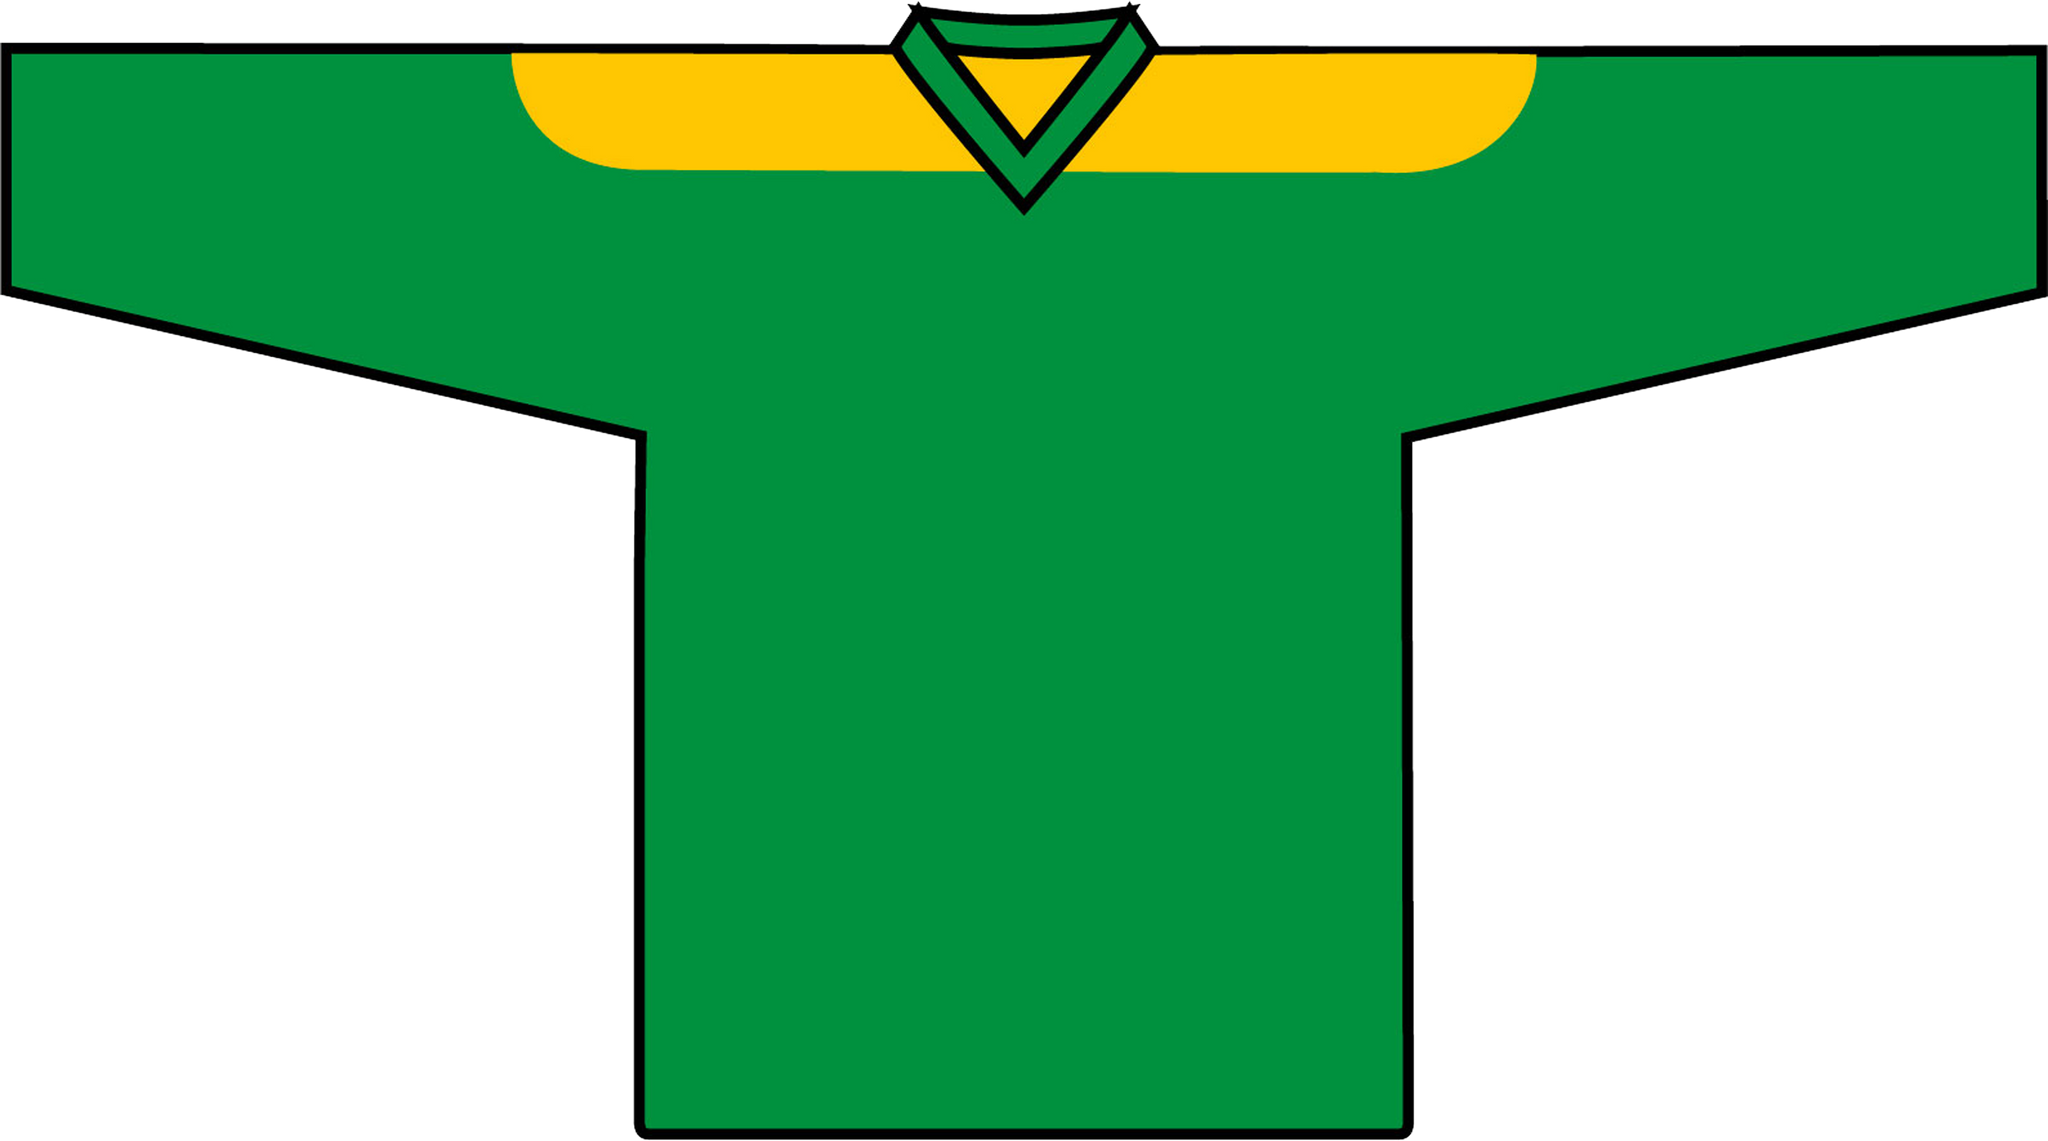 Full Team - League Jerseys - Mid-Weight Pro Knit (15 Players)